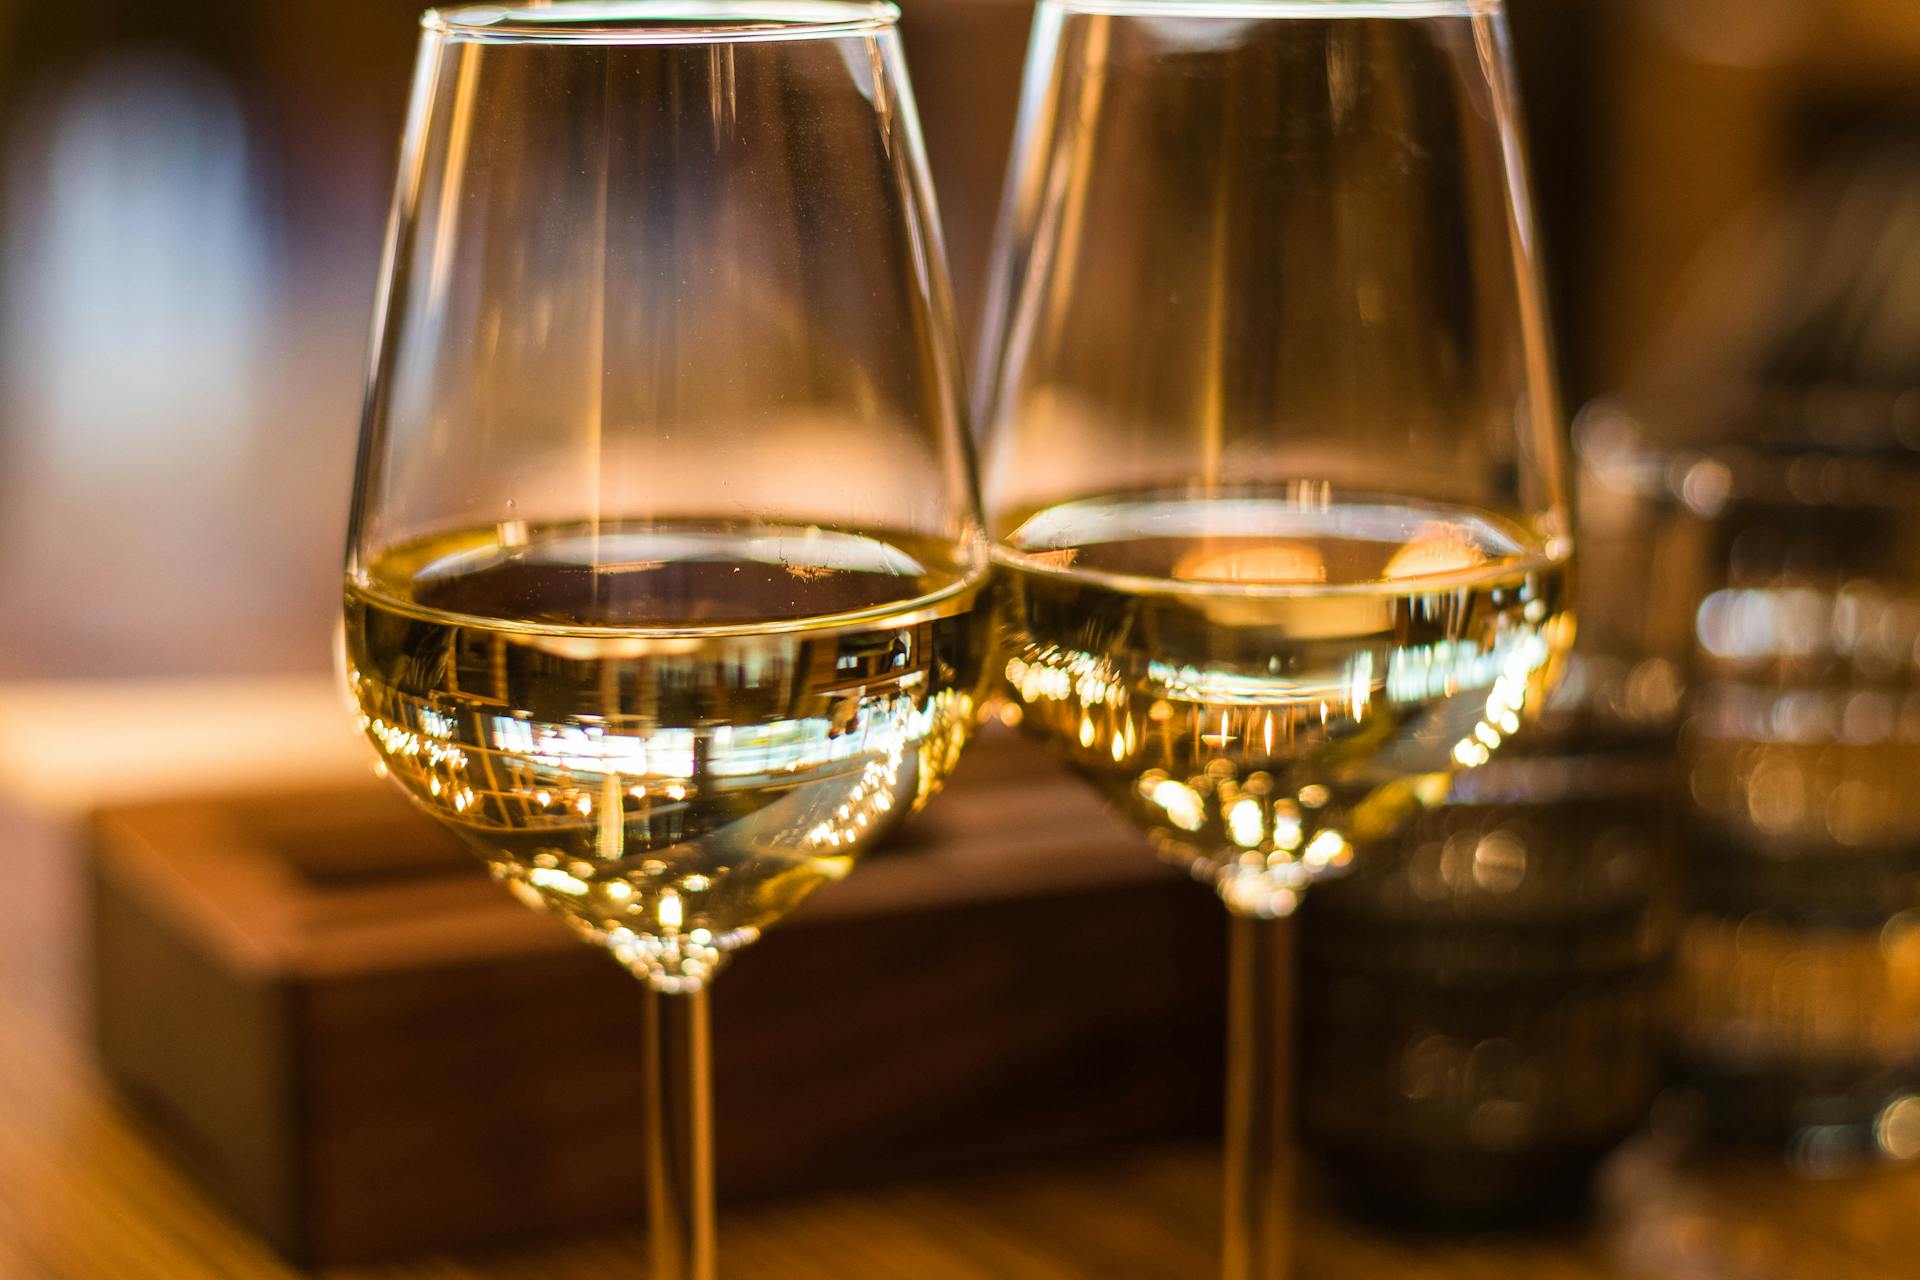 Two glasses of wine | Source: Pexels